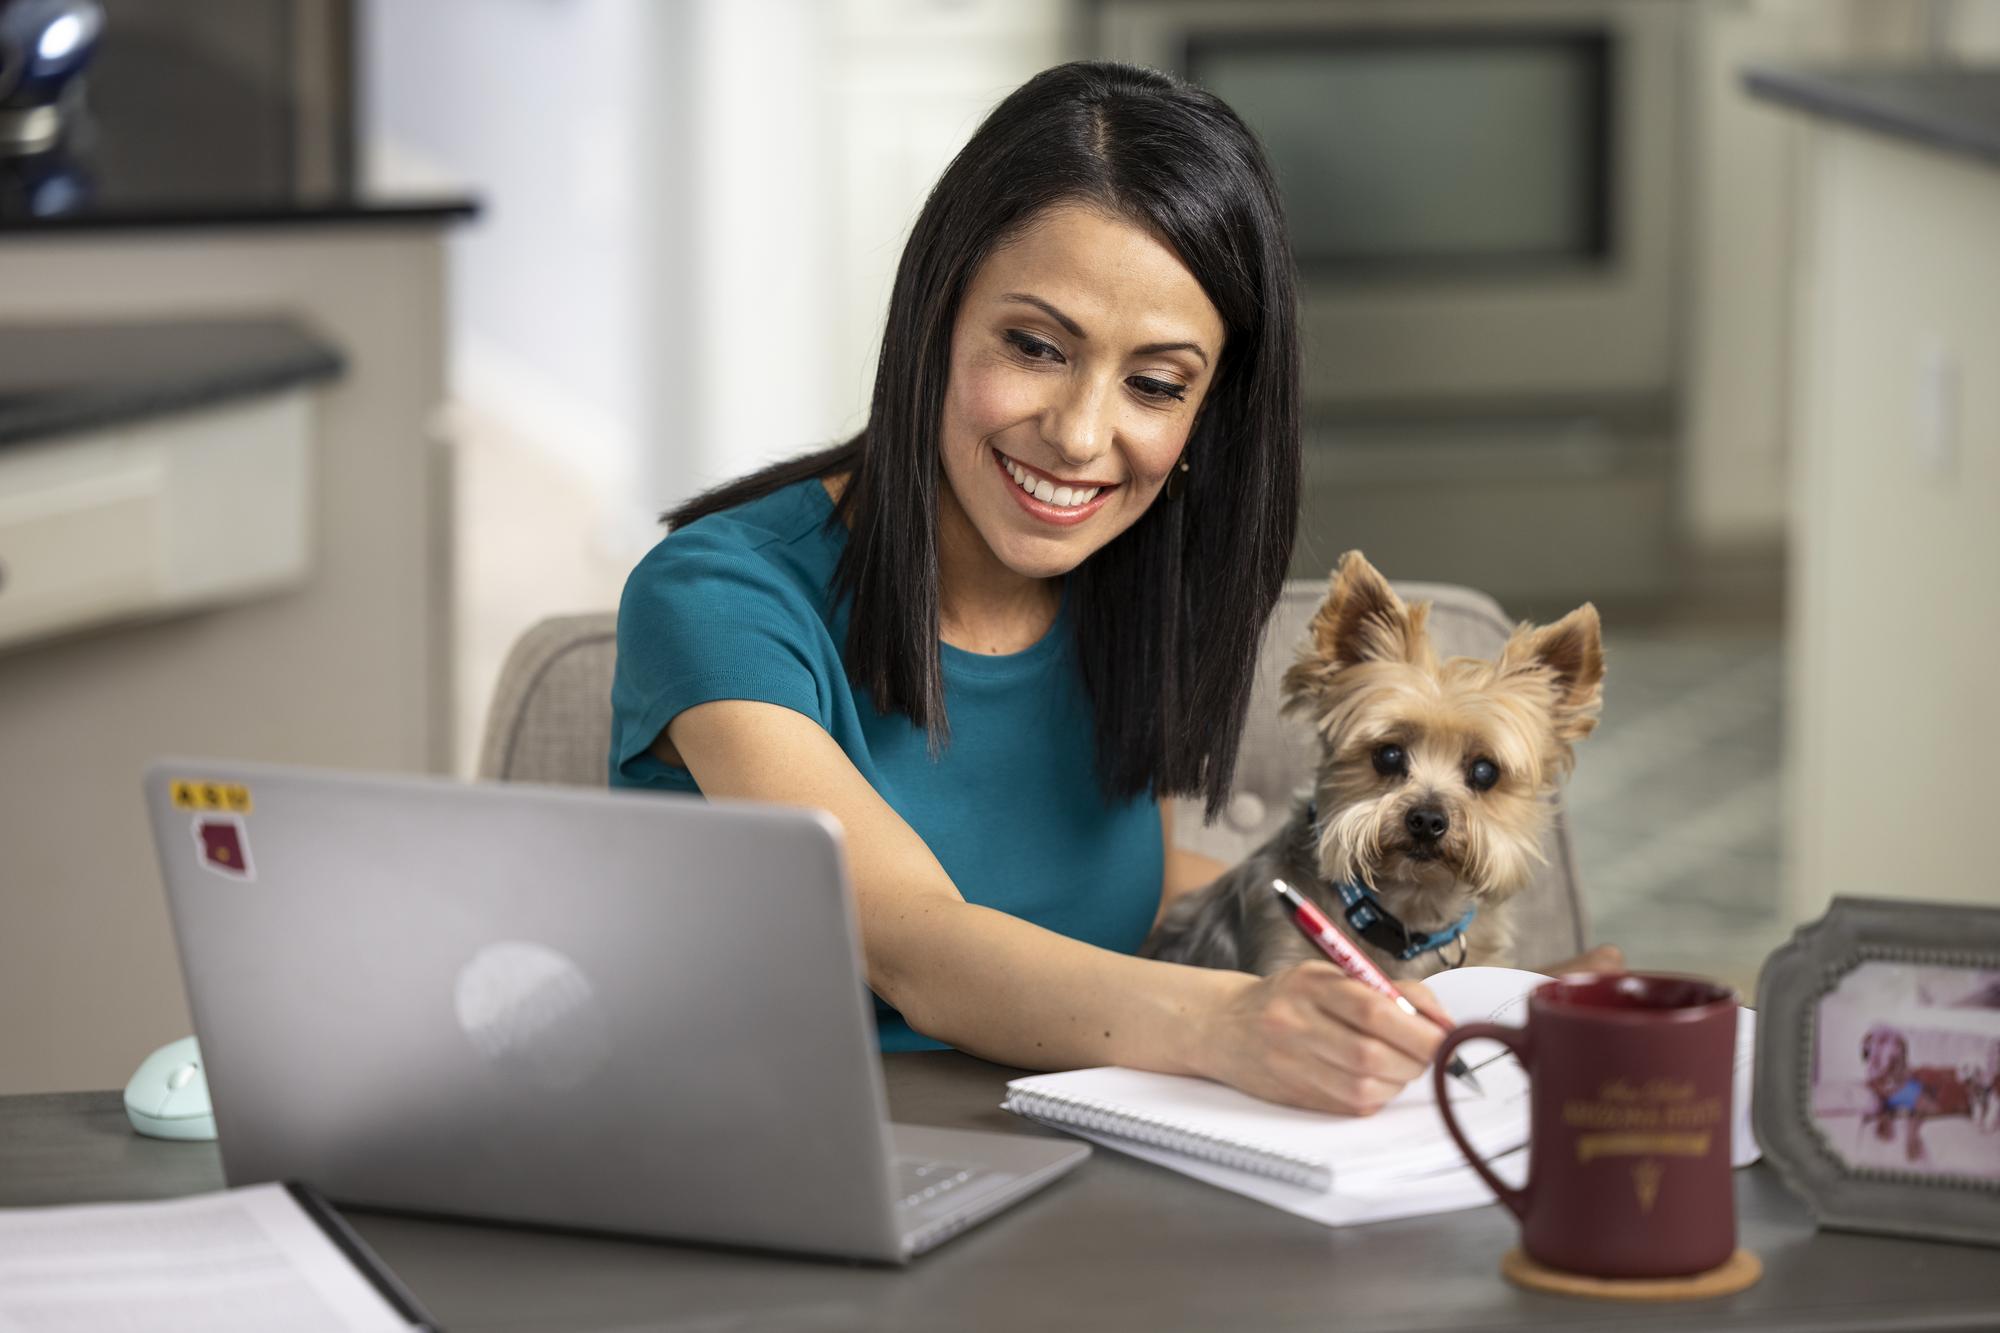 Smiling female ASU student sitting at her laptop with her small dog.